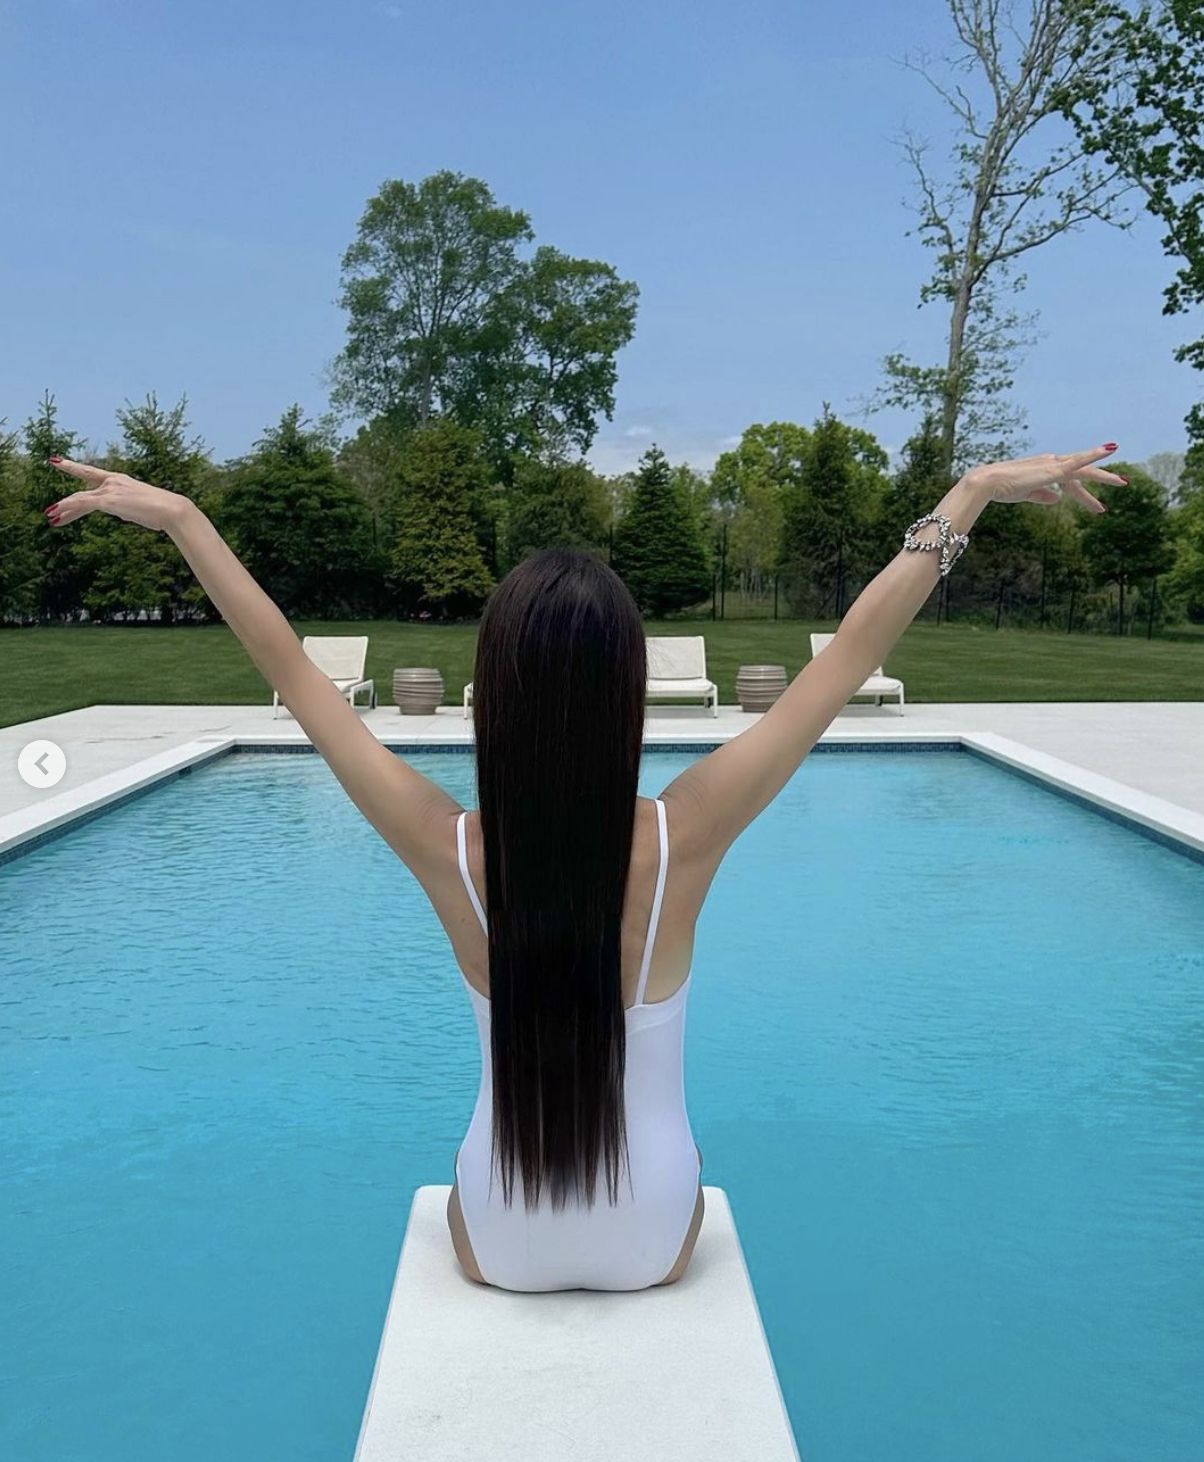 74-year-old Vera Wang shows off her eternally young body in a swimsuit